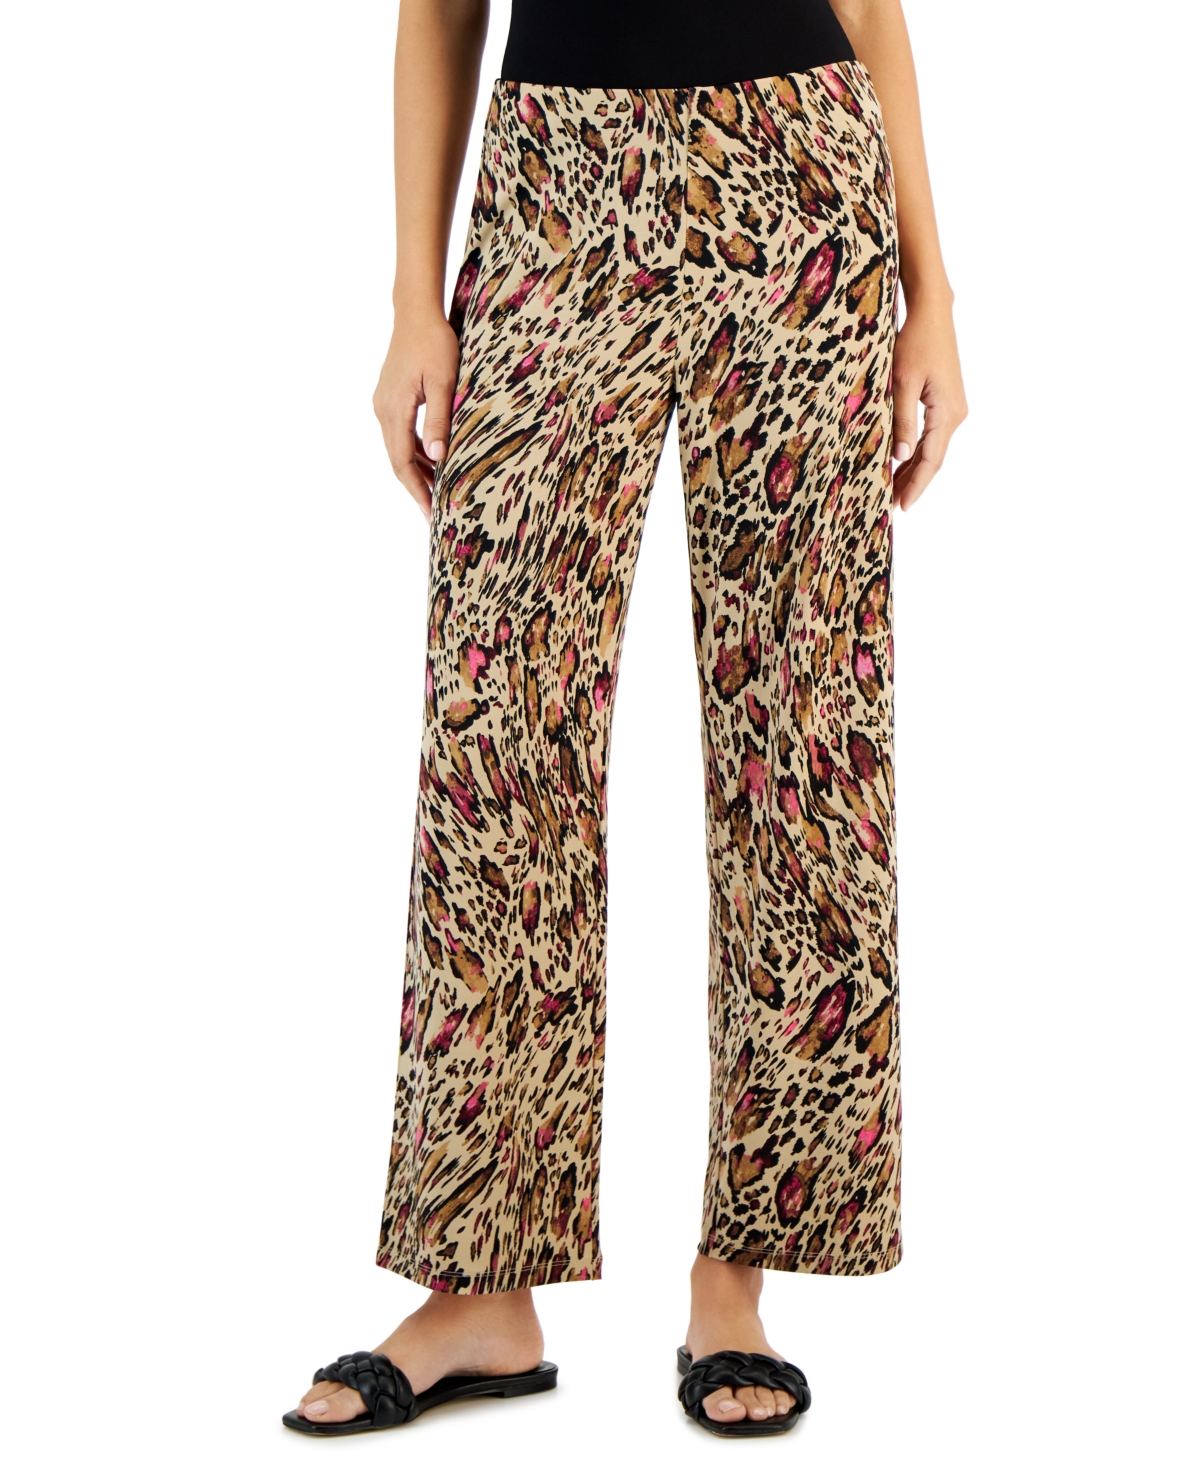 Women's Printed Knit Pull-On Pants, Created for Macy's - New Fawn Combo